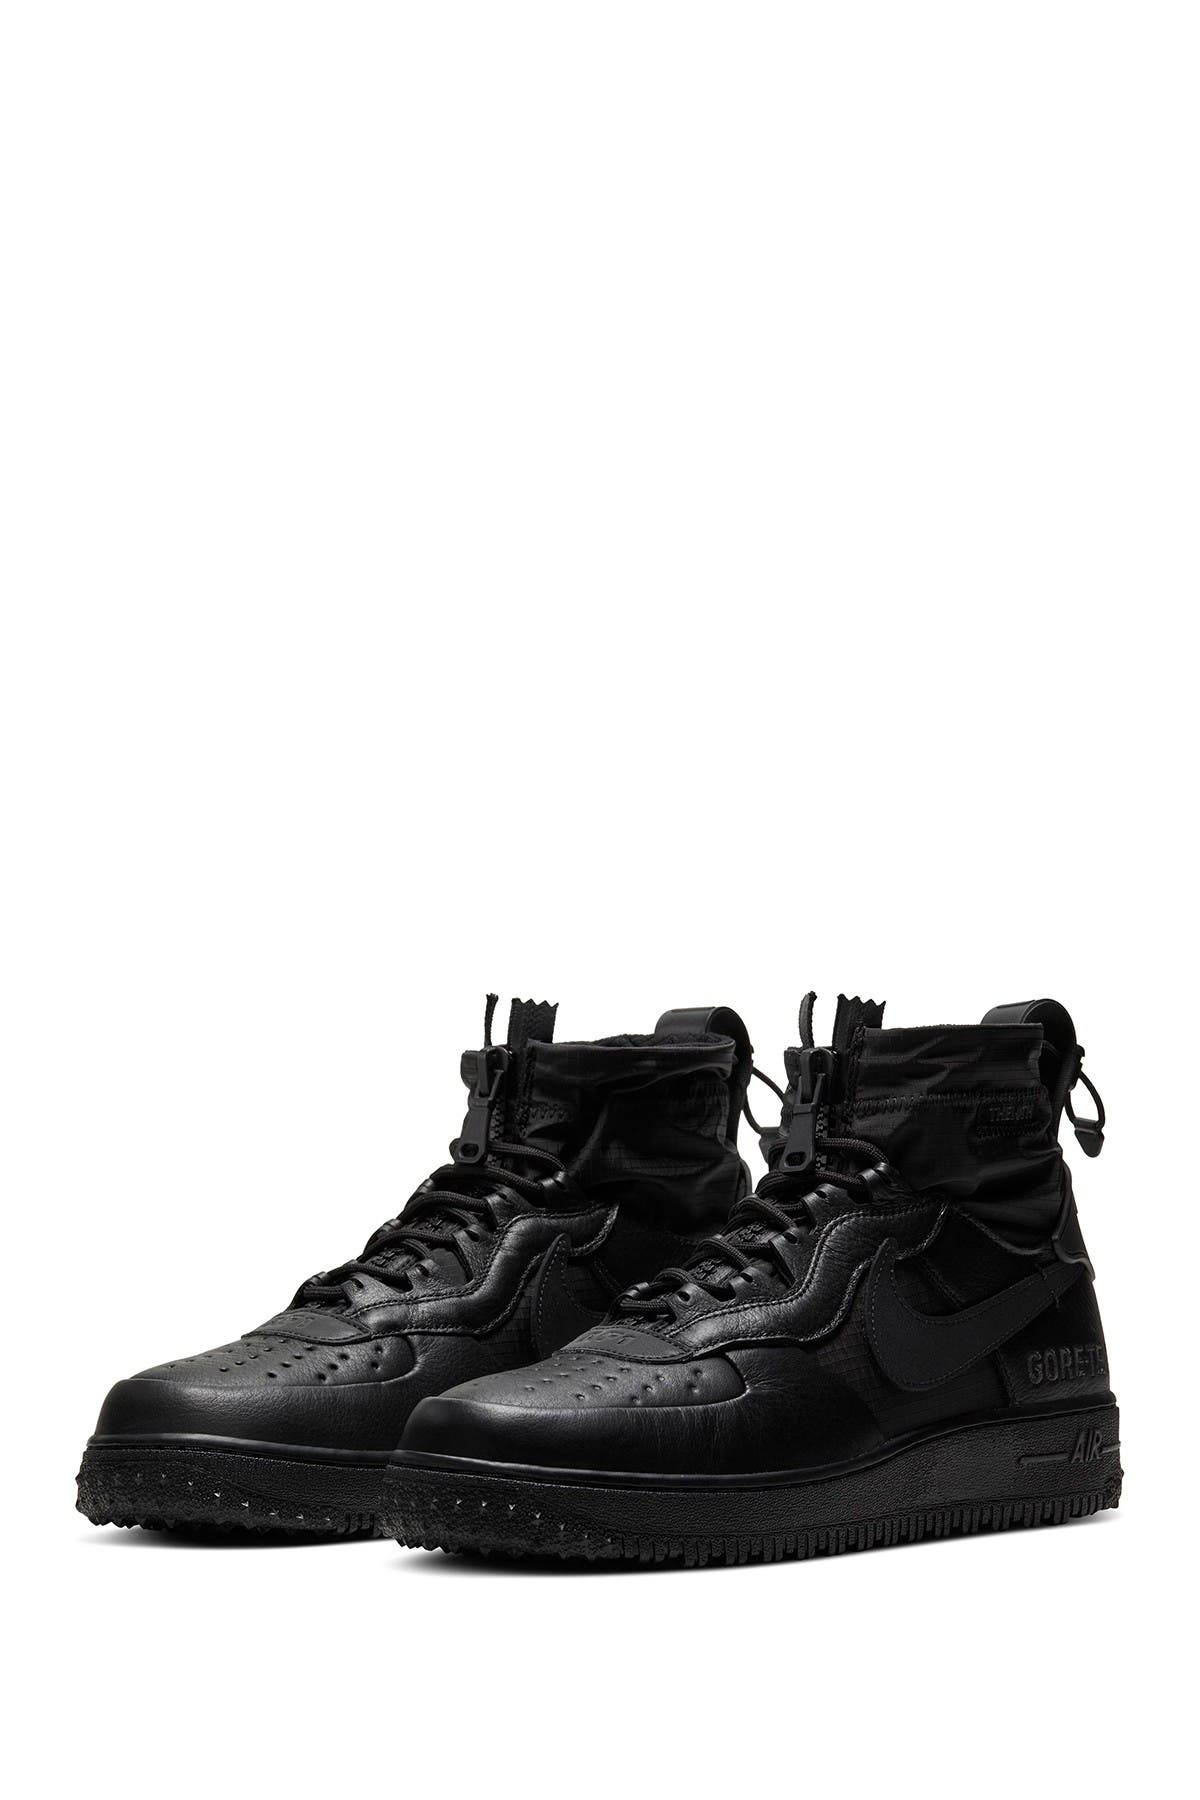 nike air force one boots black